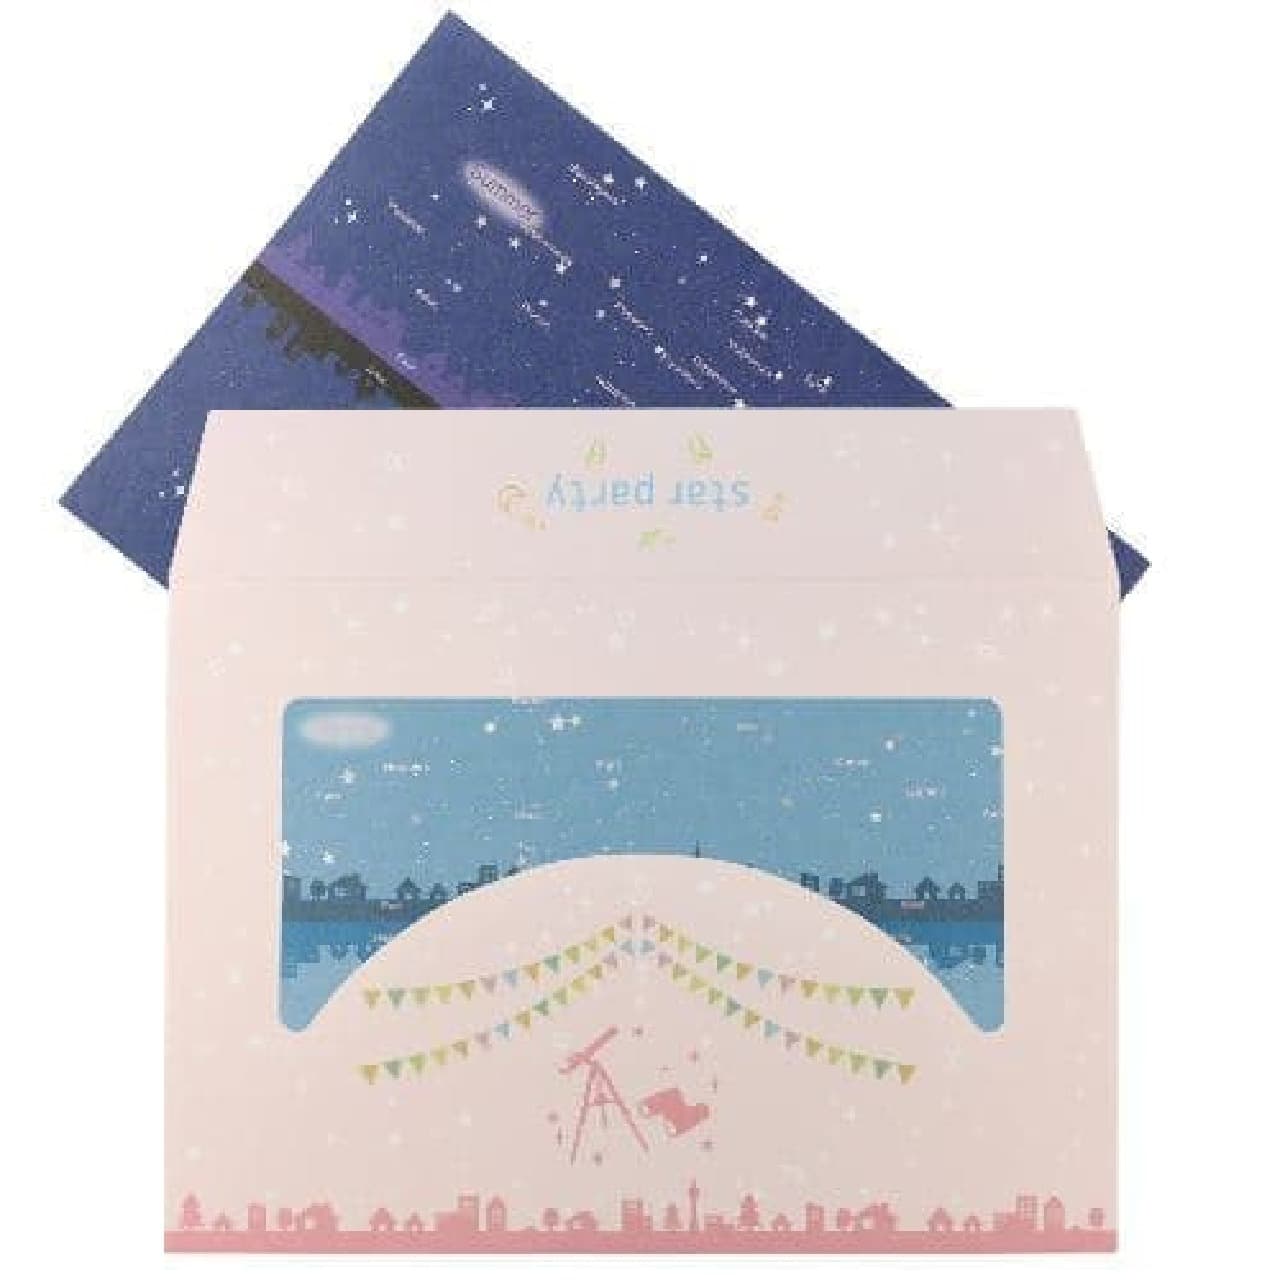 Vixen letter set and schedule sticker designed for celestial bodies and starry sky